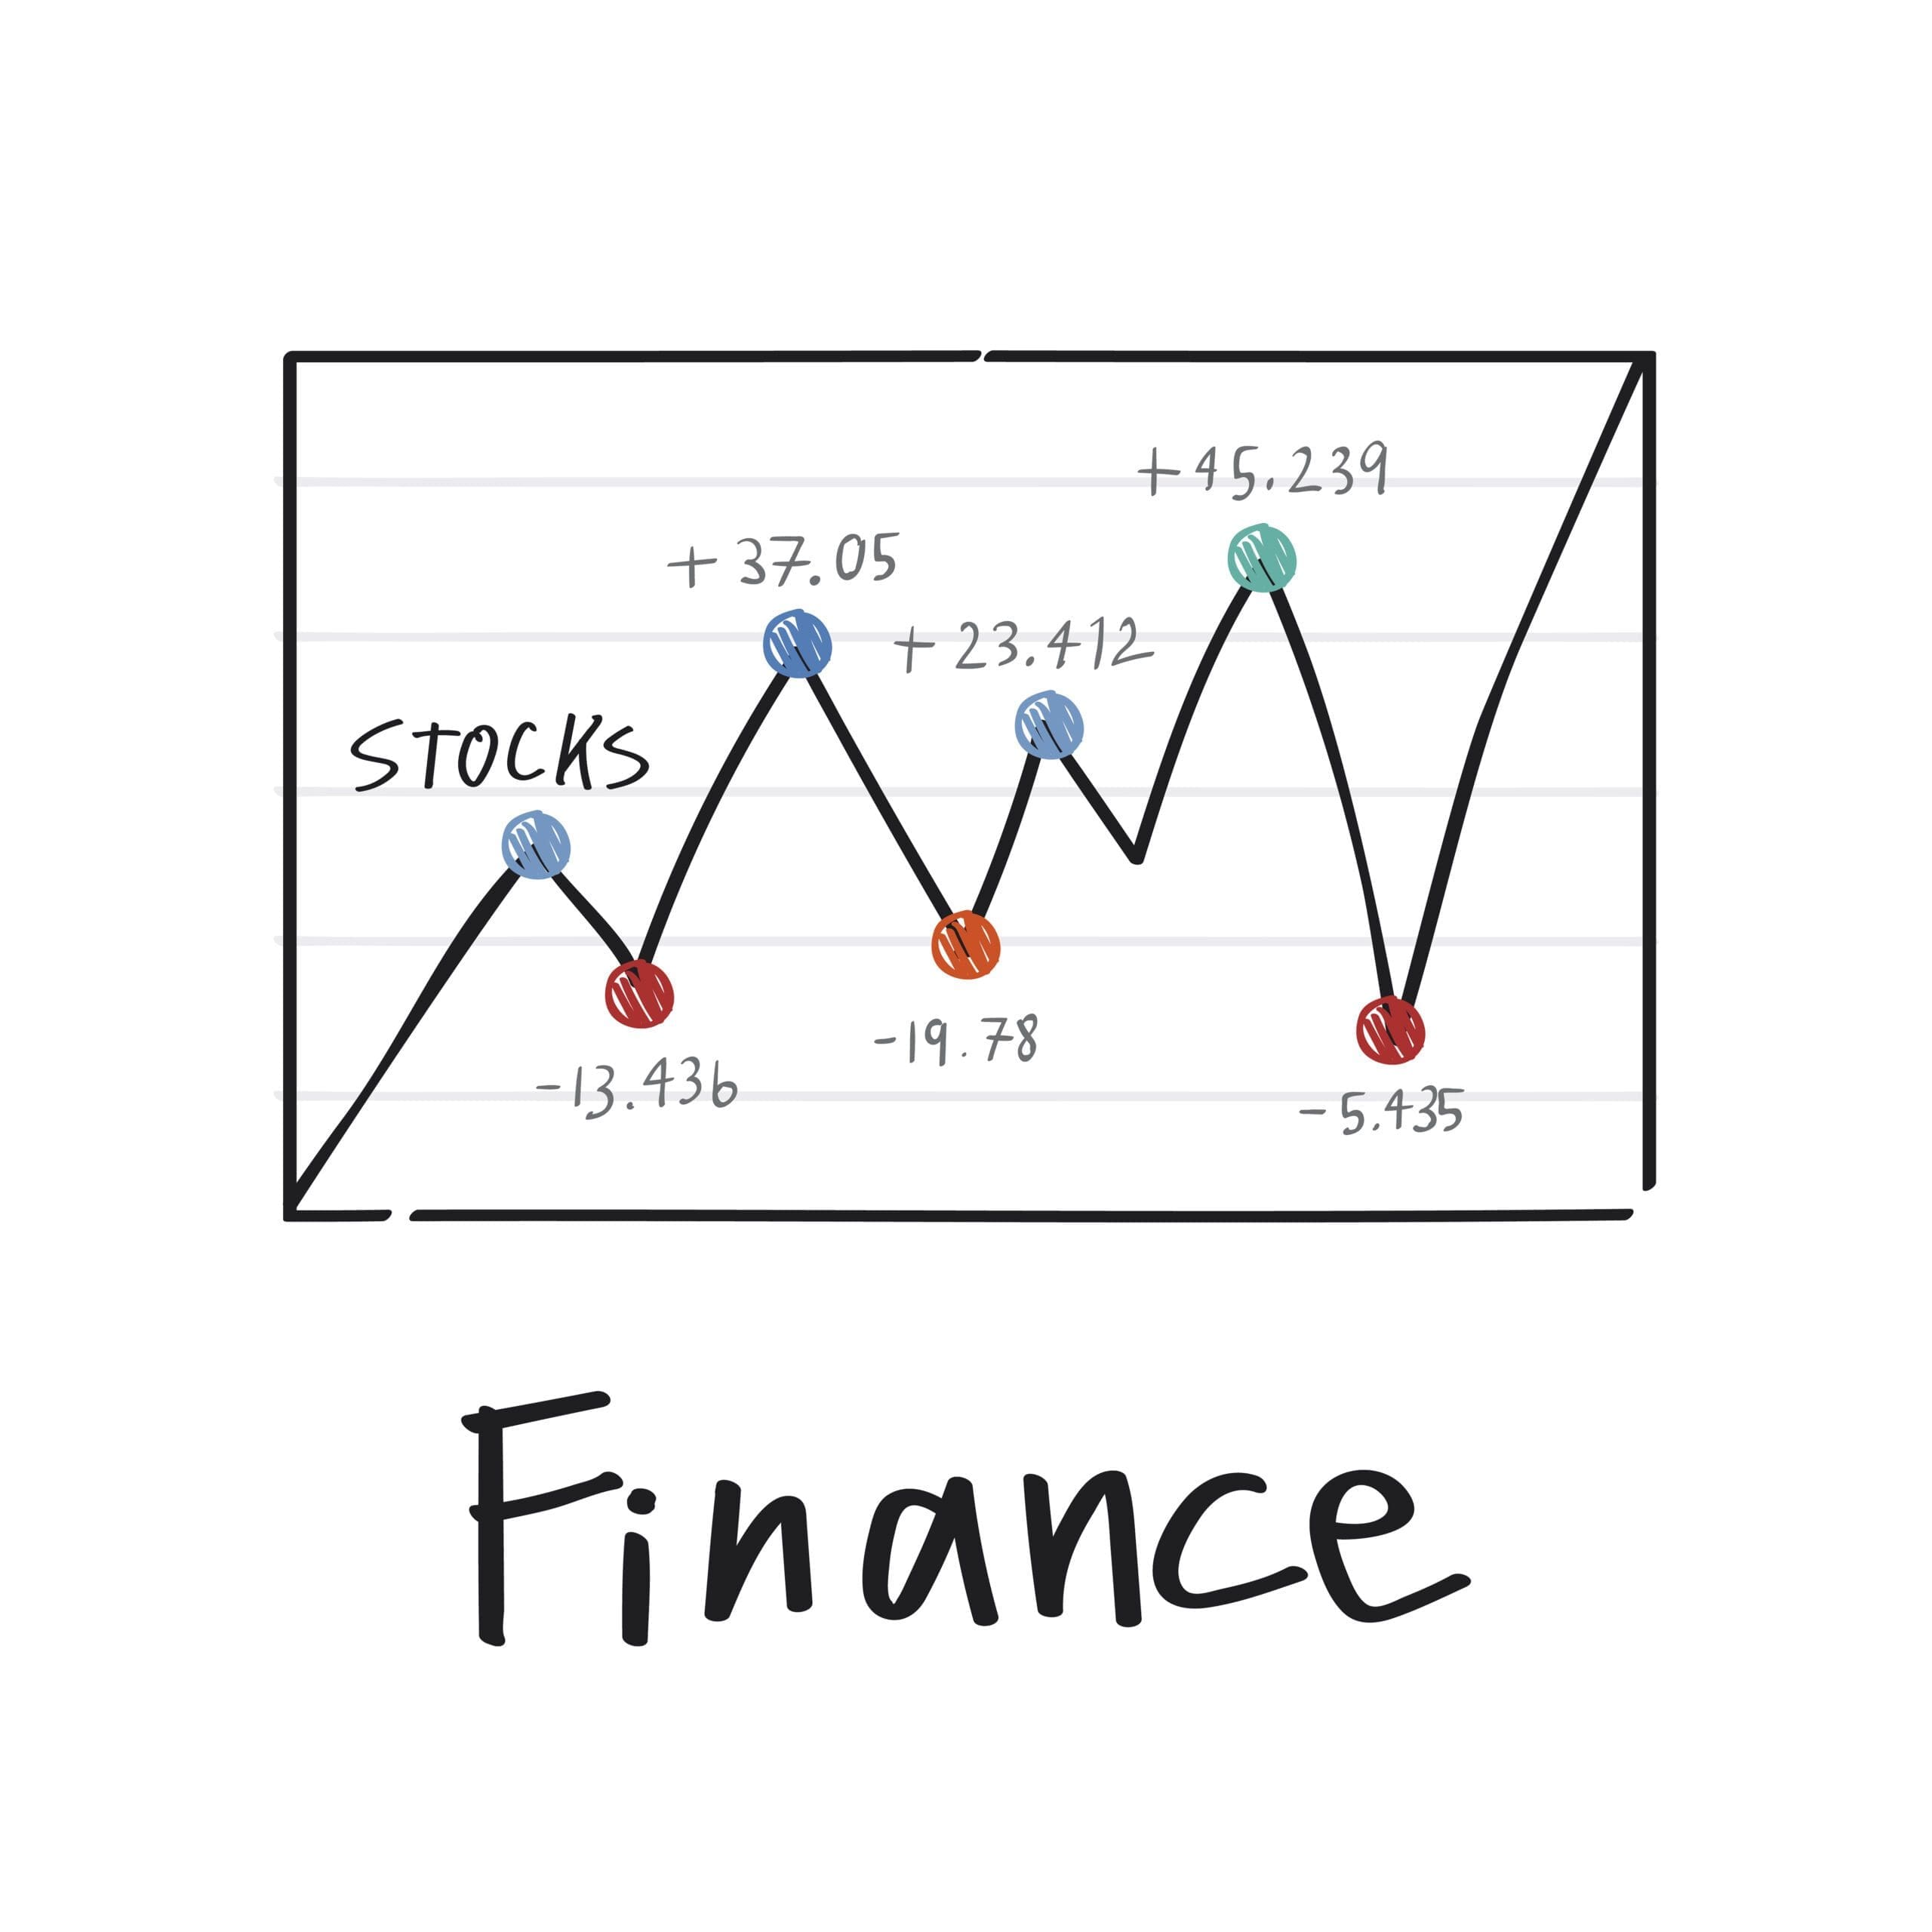 Fluctuation in financial stock market graph illustration